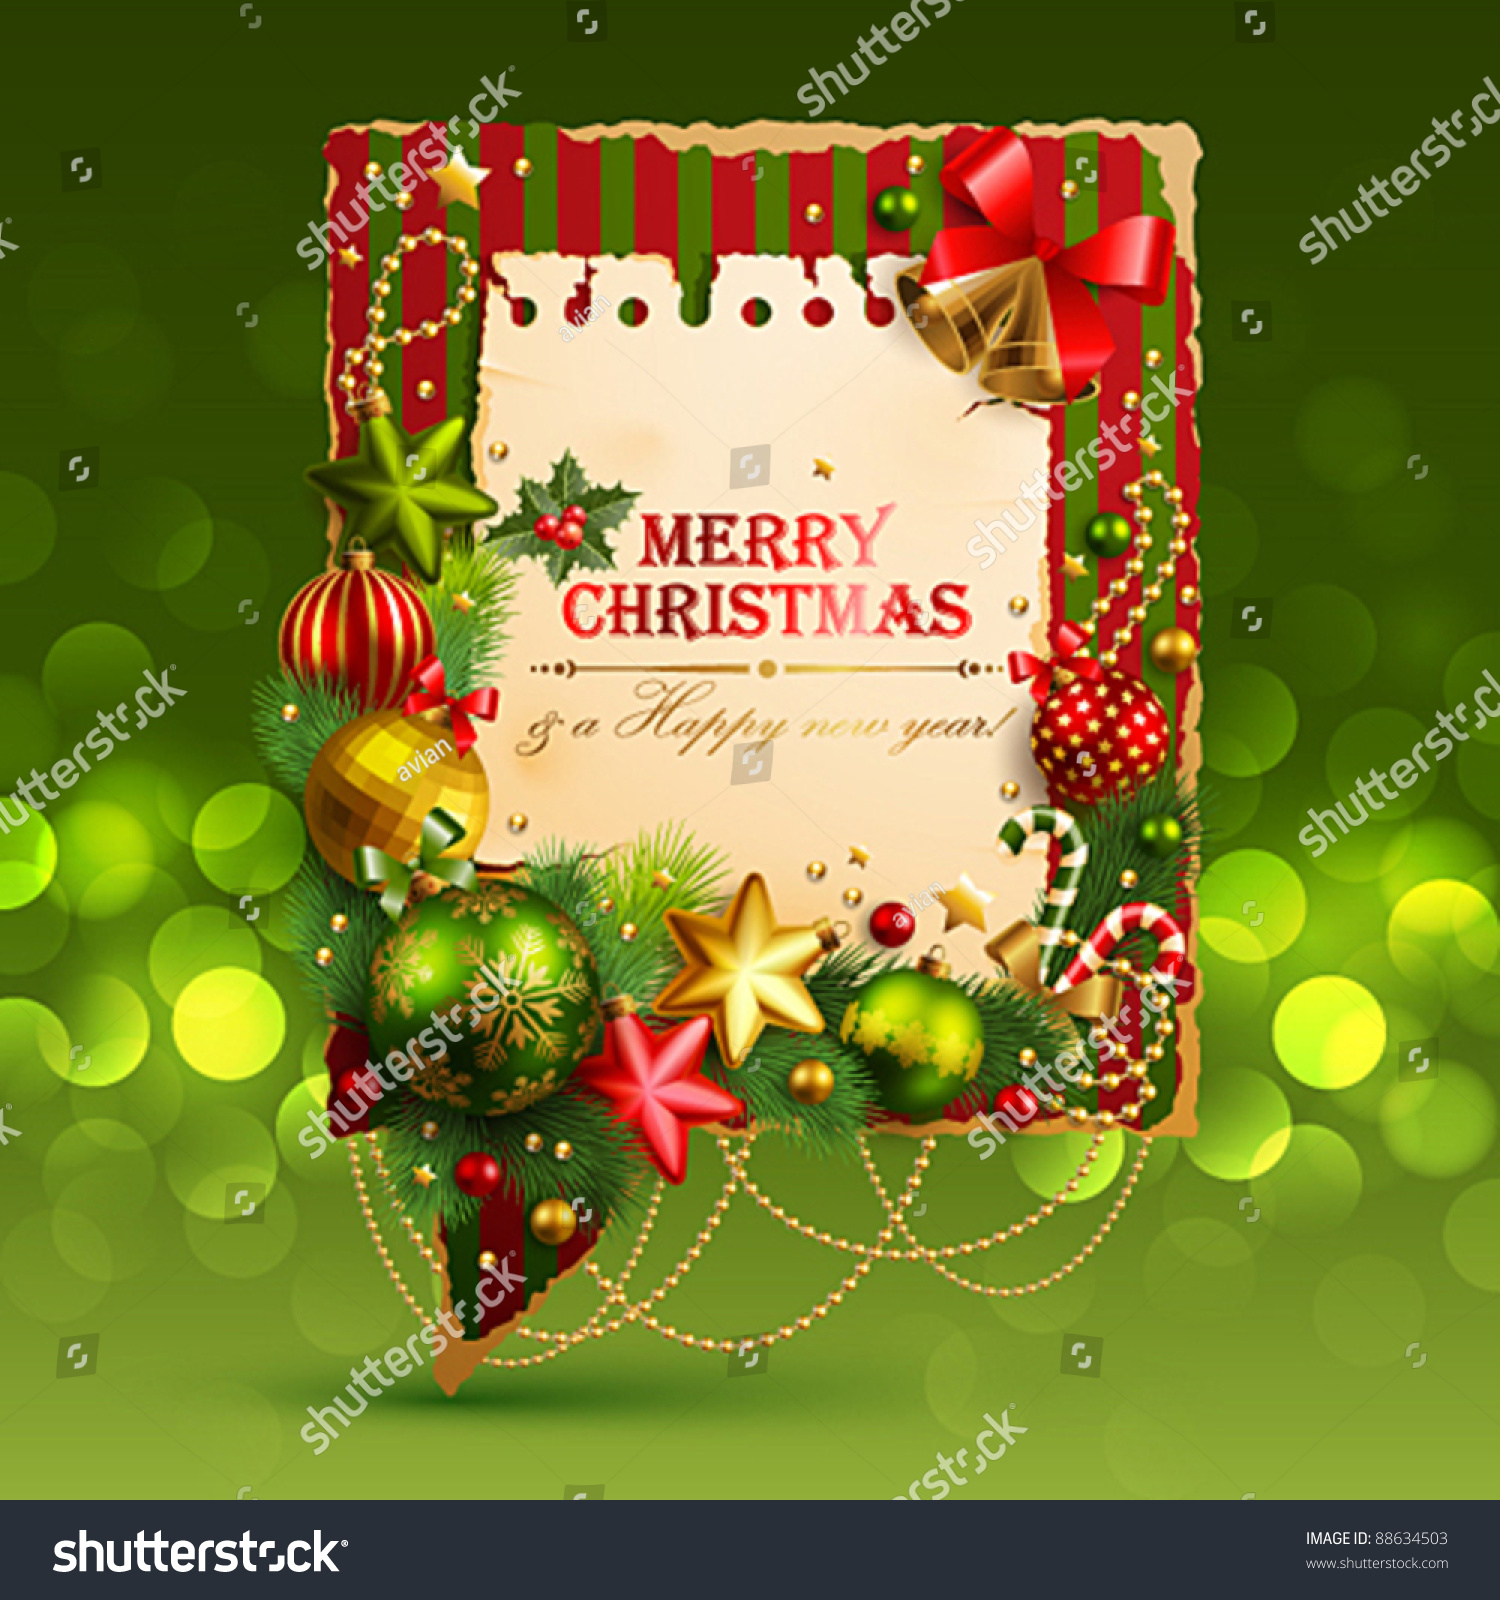 Merry Christmas Card Vector Free Download